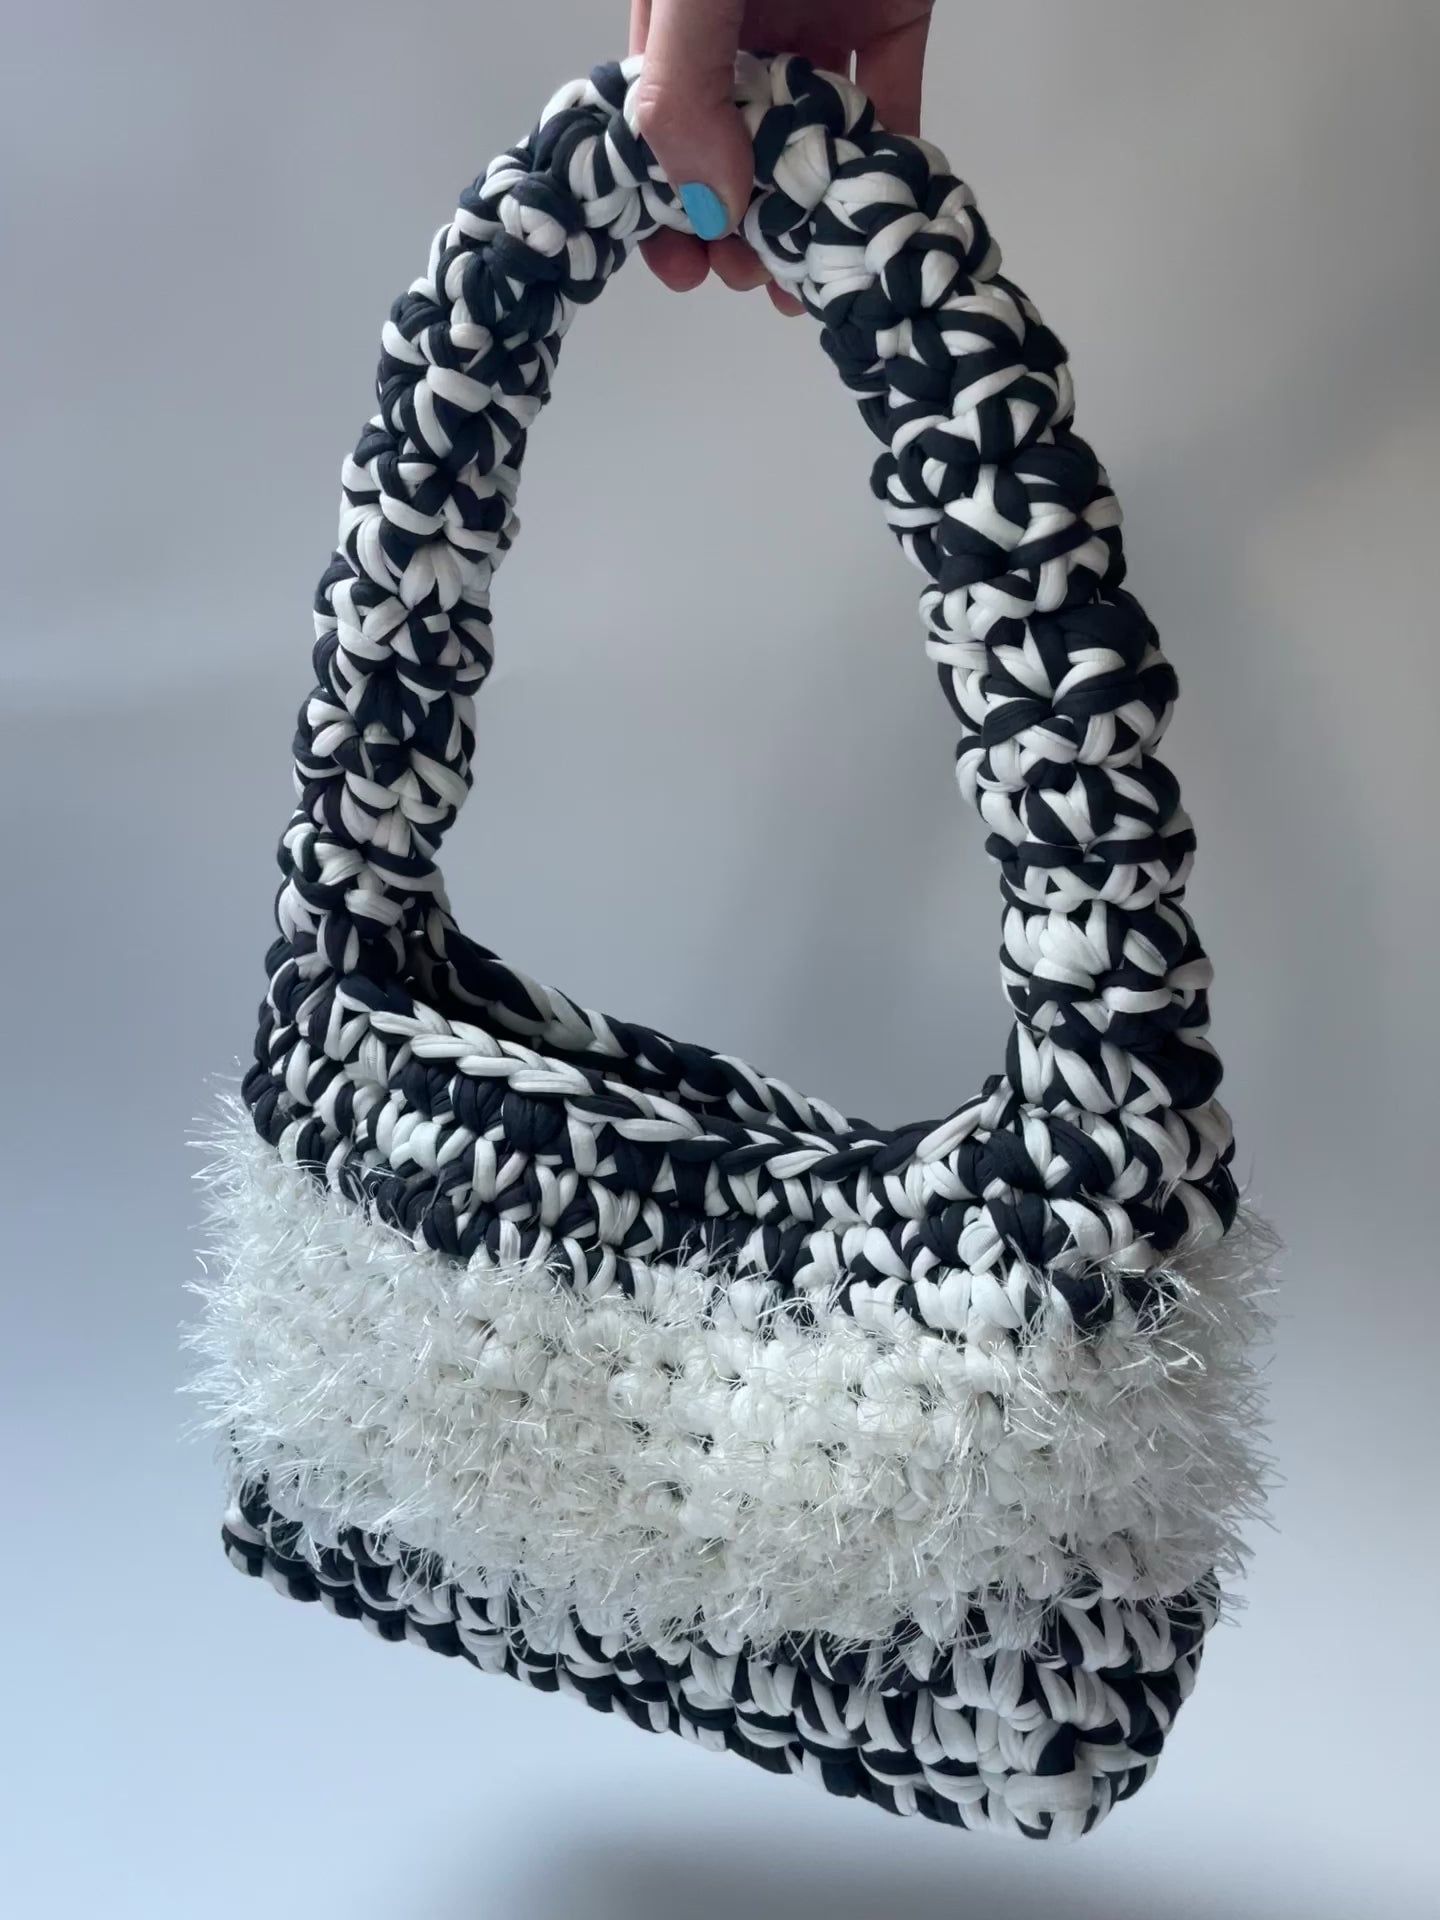 Black and white crochet bag with white fluffy detailing in the middle